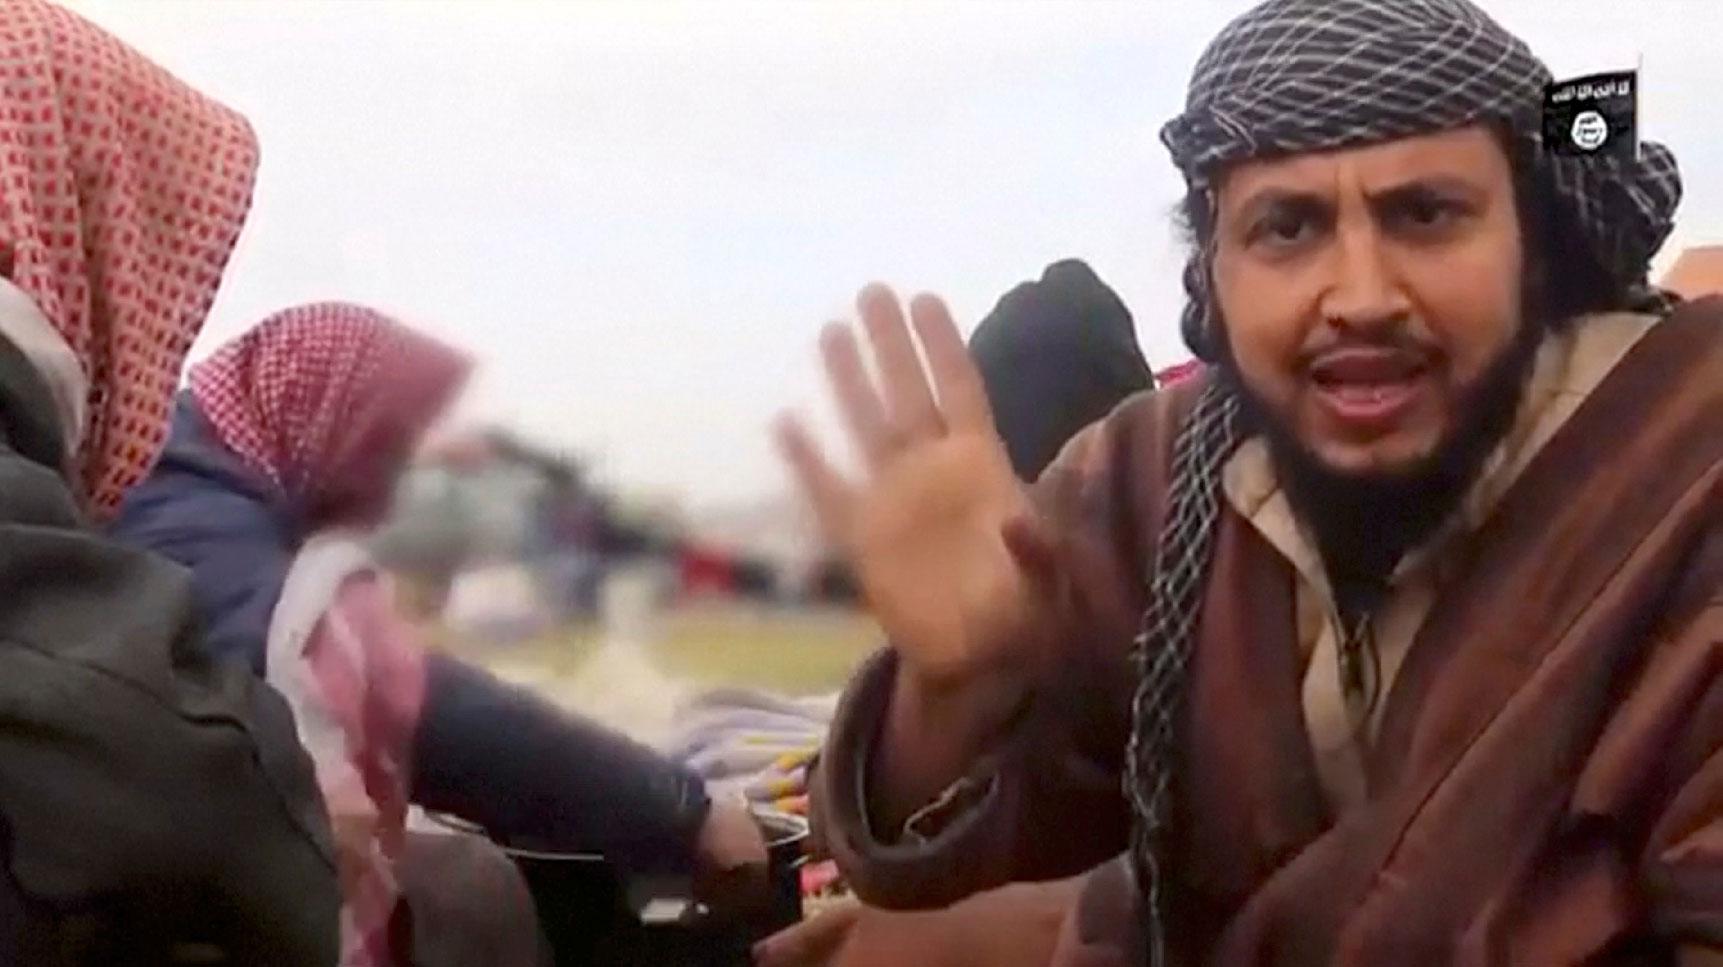 A man said to be an Islamic State militant, Abu Abd Al-Azeem, speaks in Baghouz, Syria in this still image taken from a video obtained by Reuters March 12, 2019.